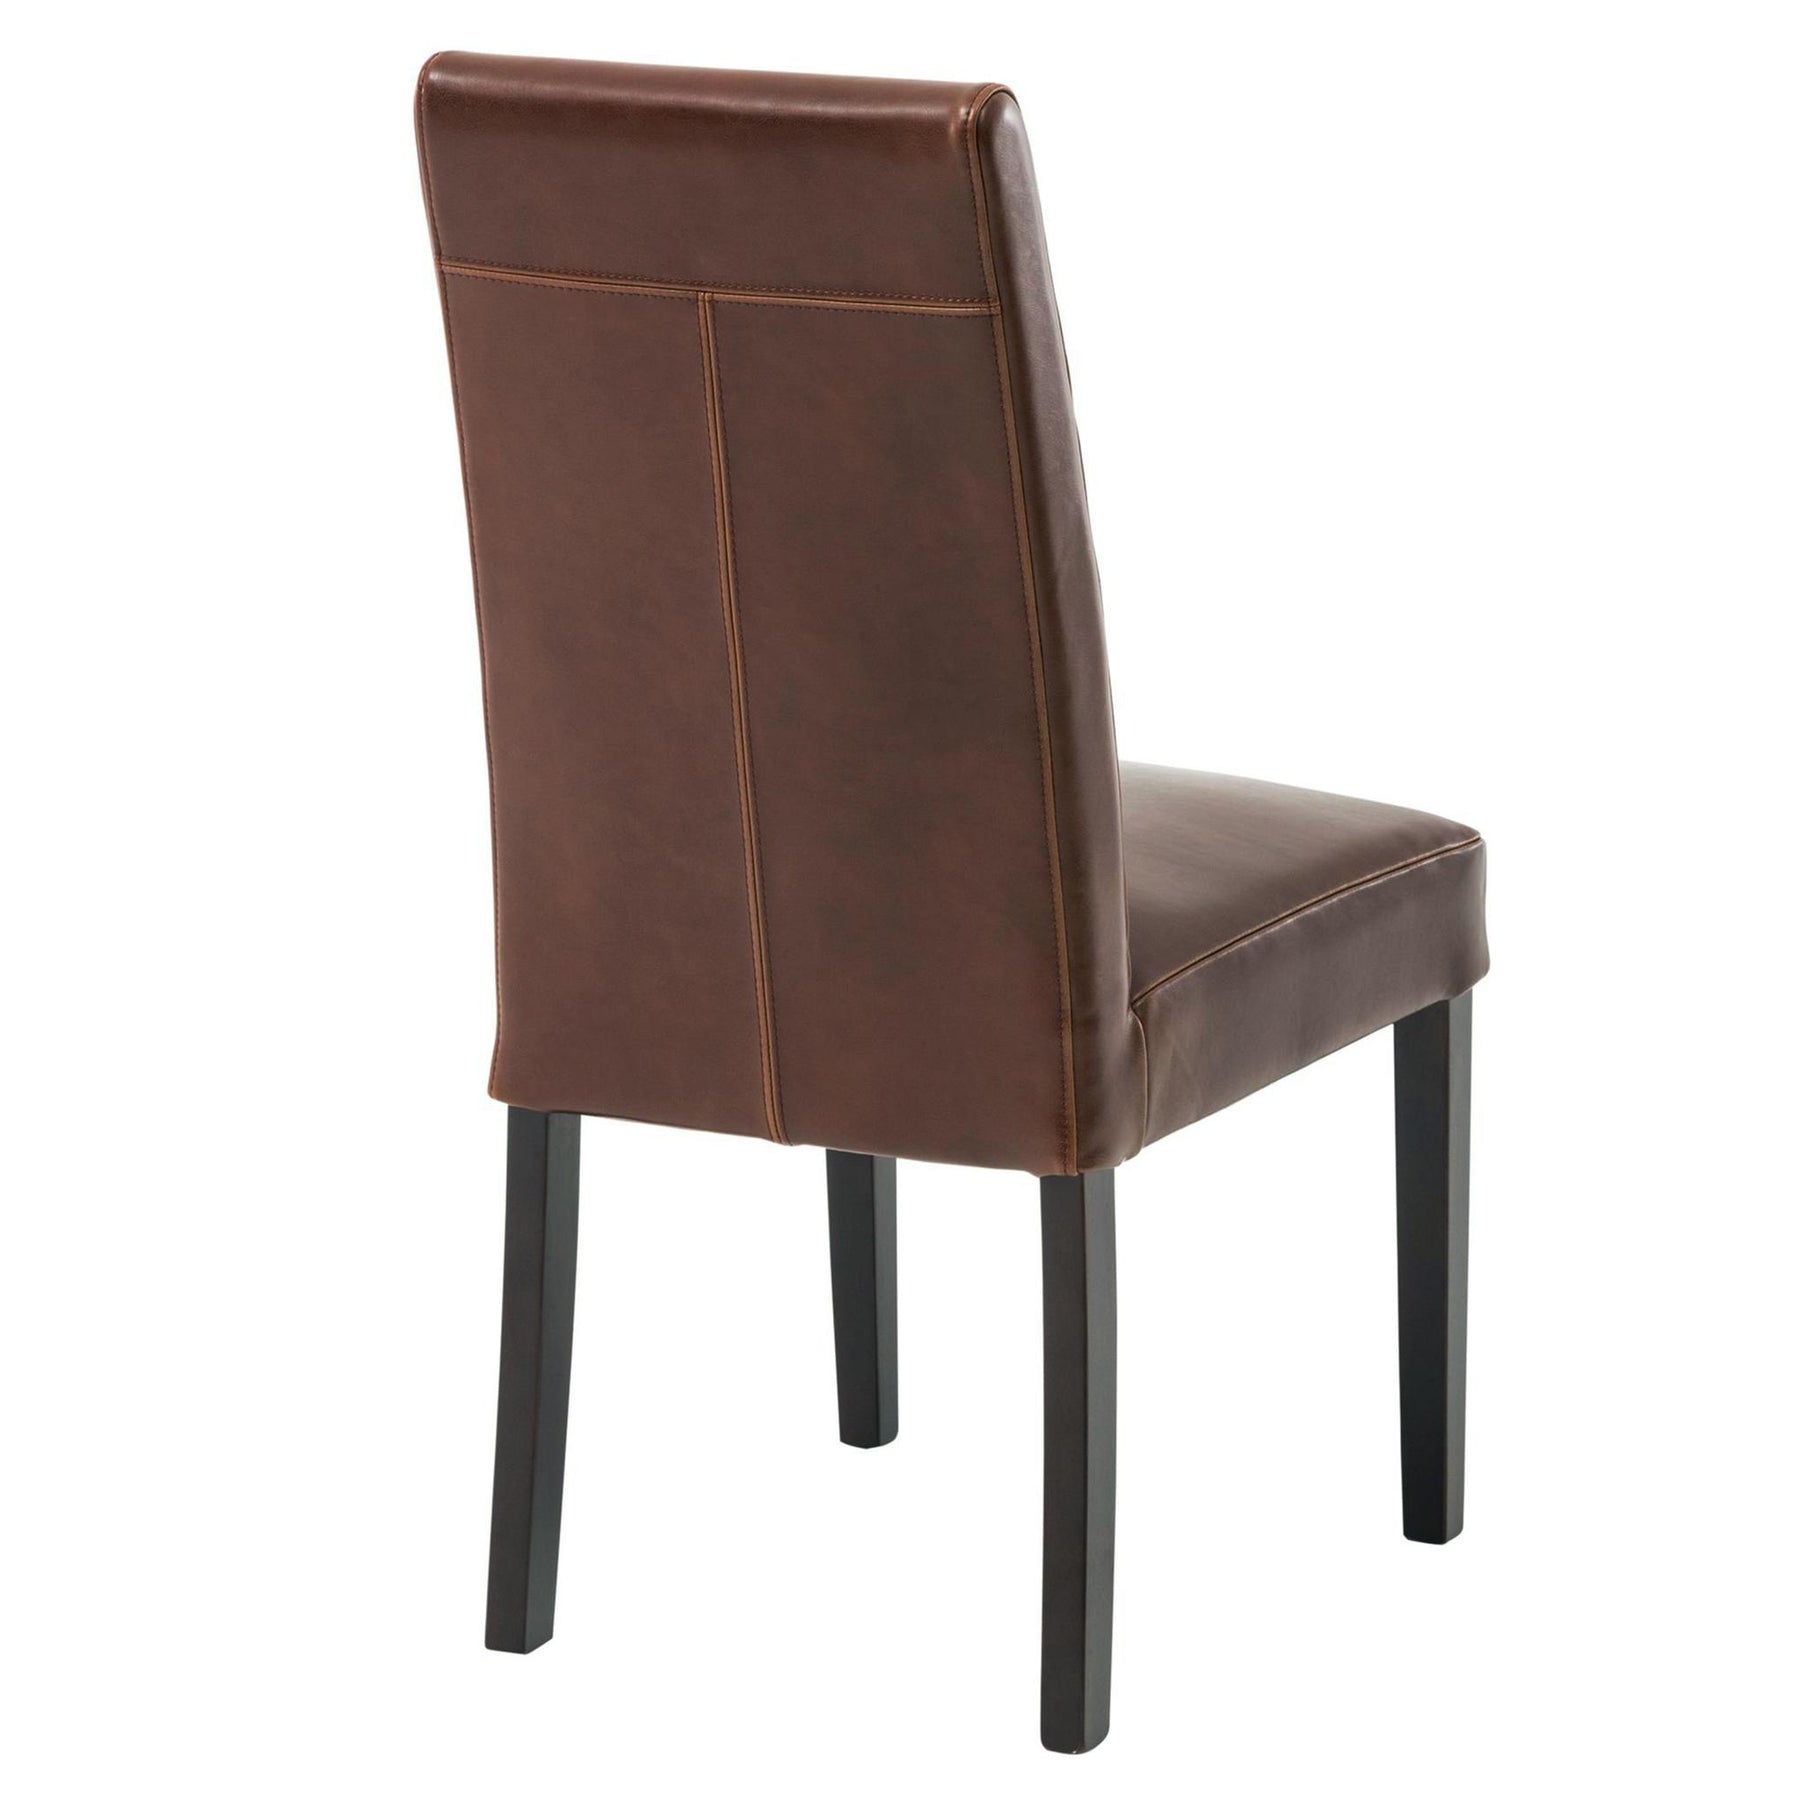 Hartford Bicast Leather Dining Chair (Set of 2) by New Pacific Direct - 198140